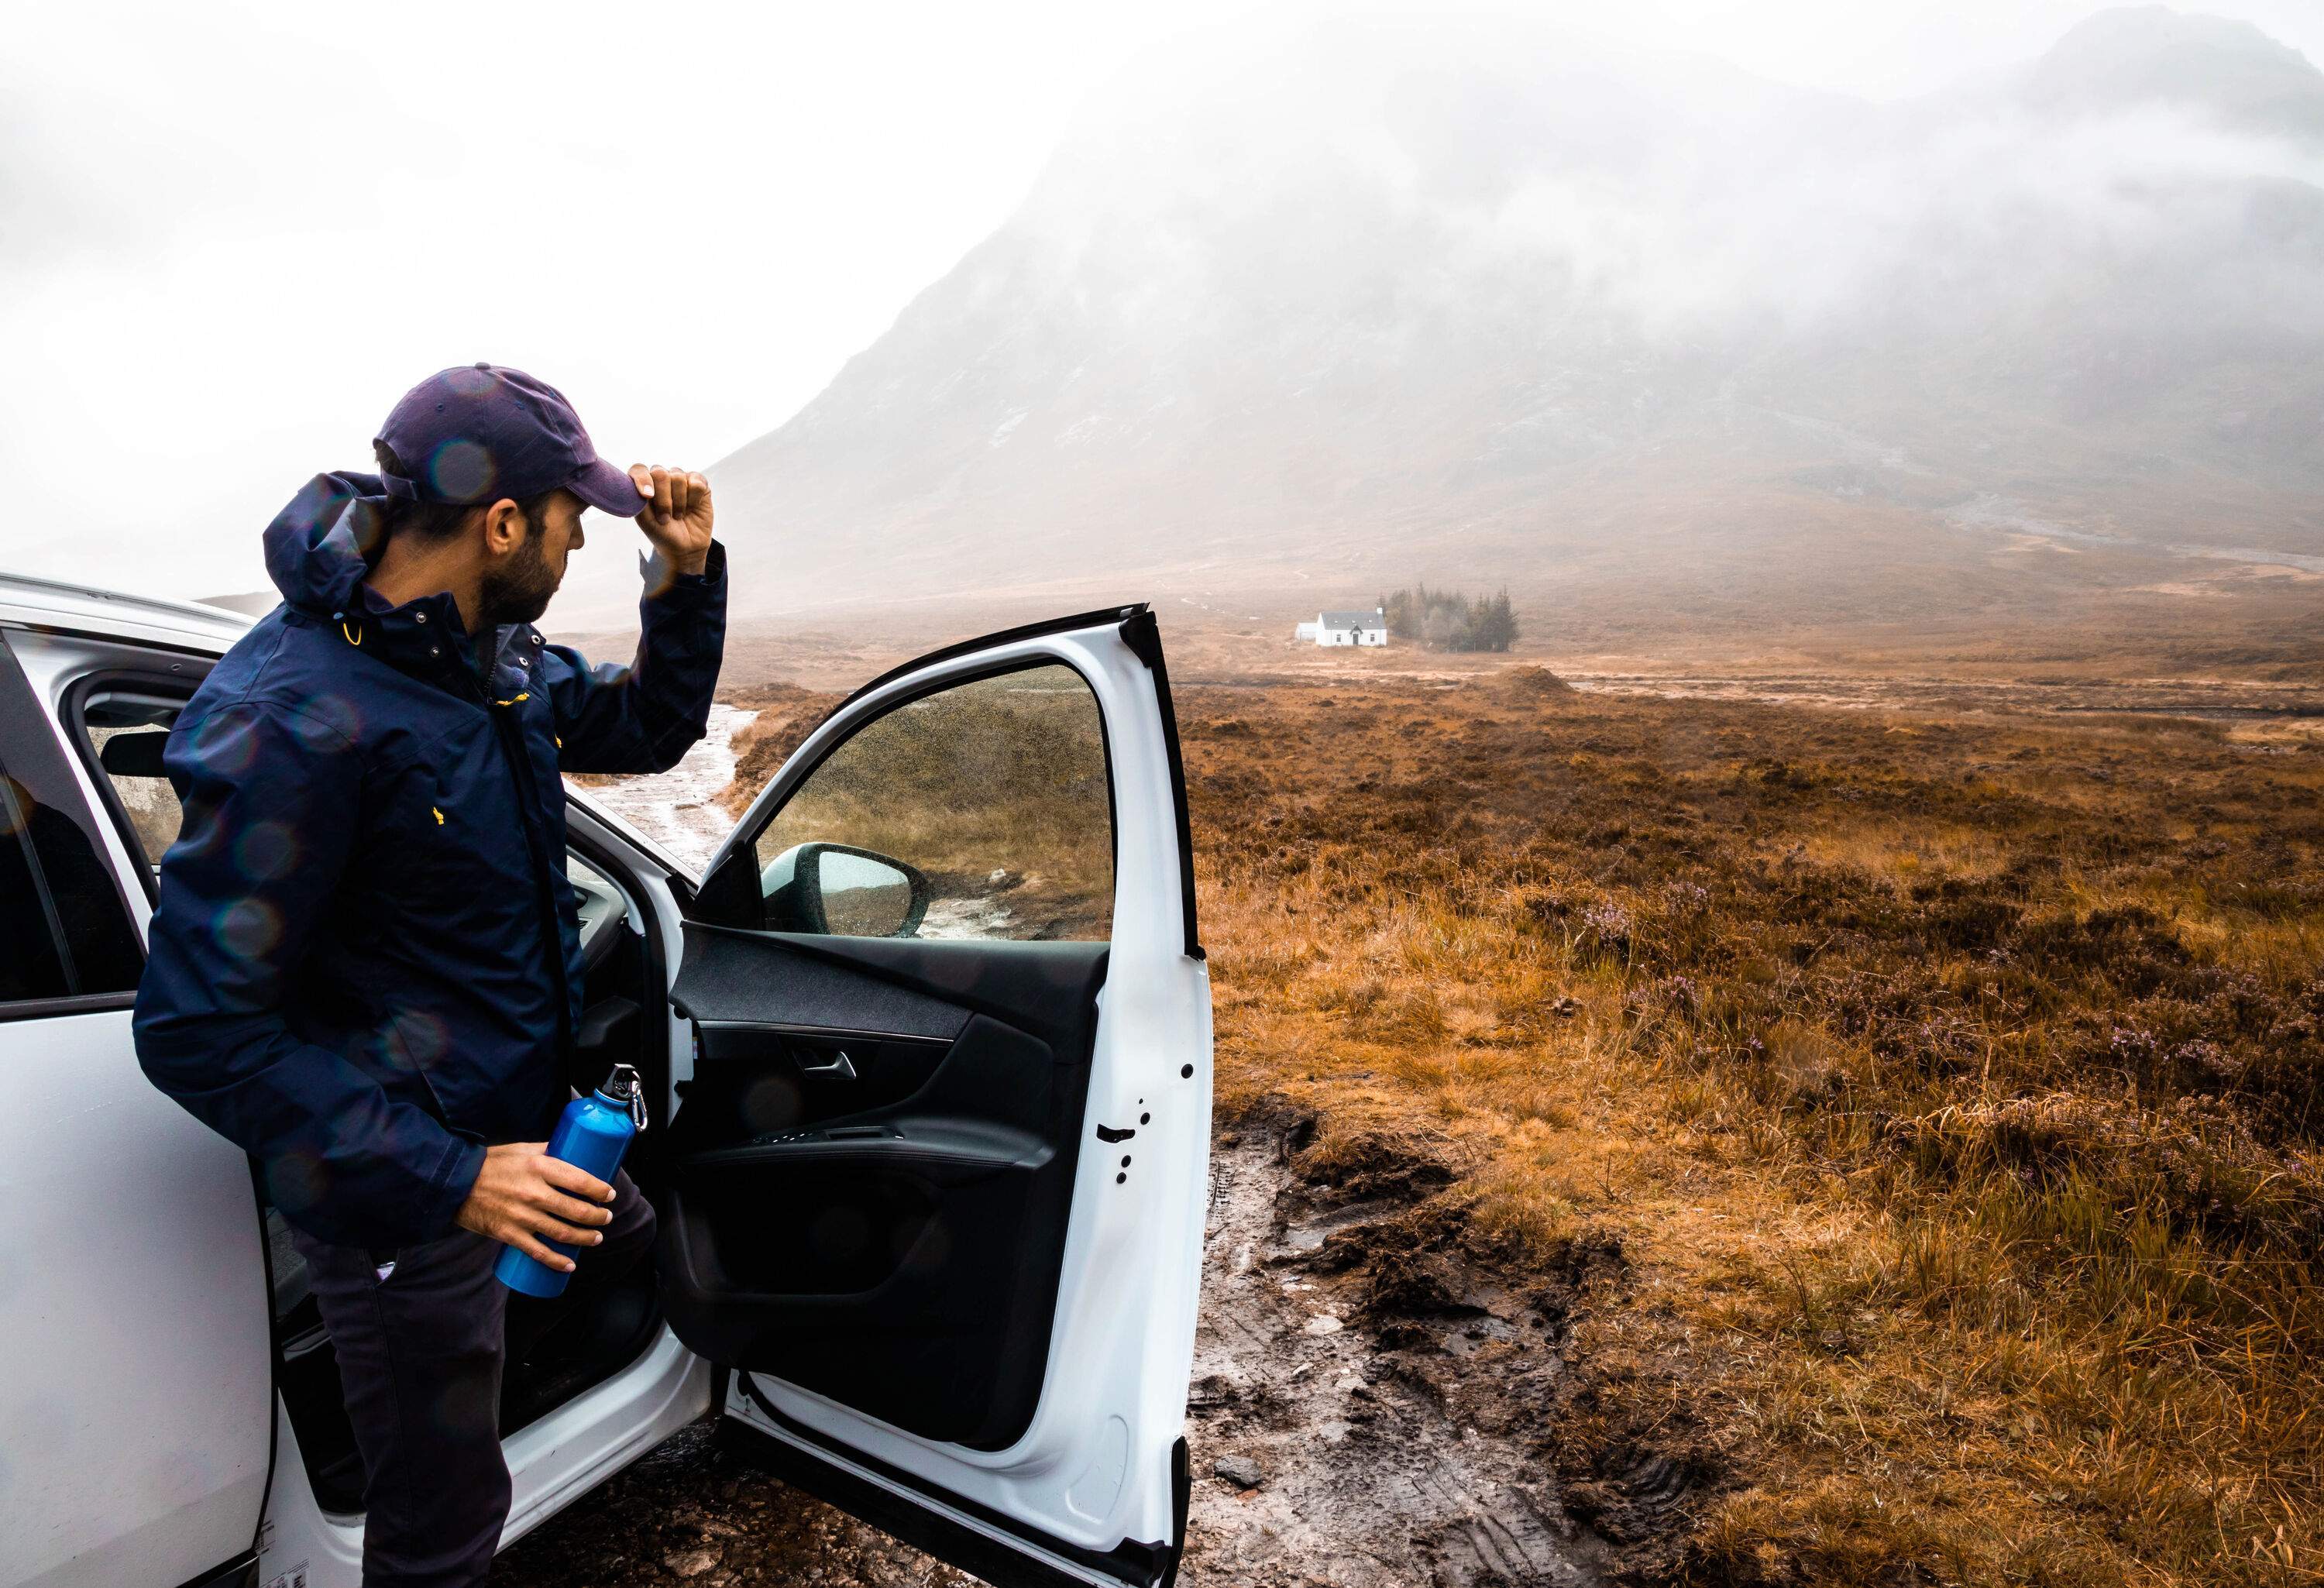 Man clad in a blue windbreaker emerges from a white car, holding a flask and looking at the bare landscape on a cloudy day